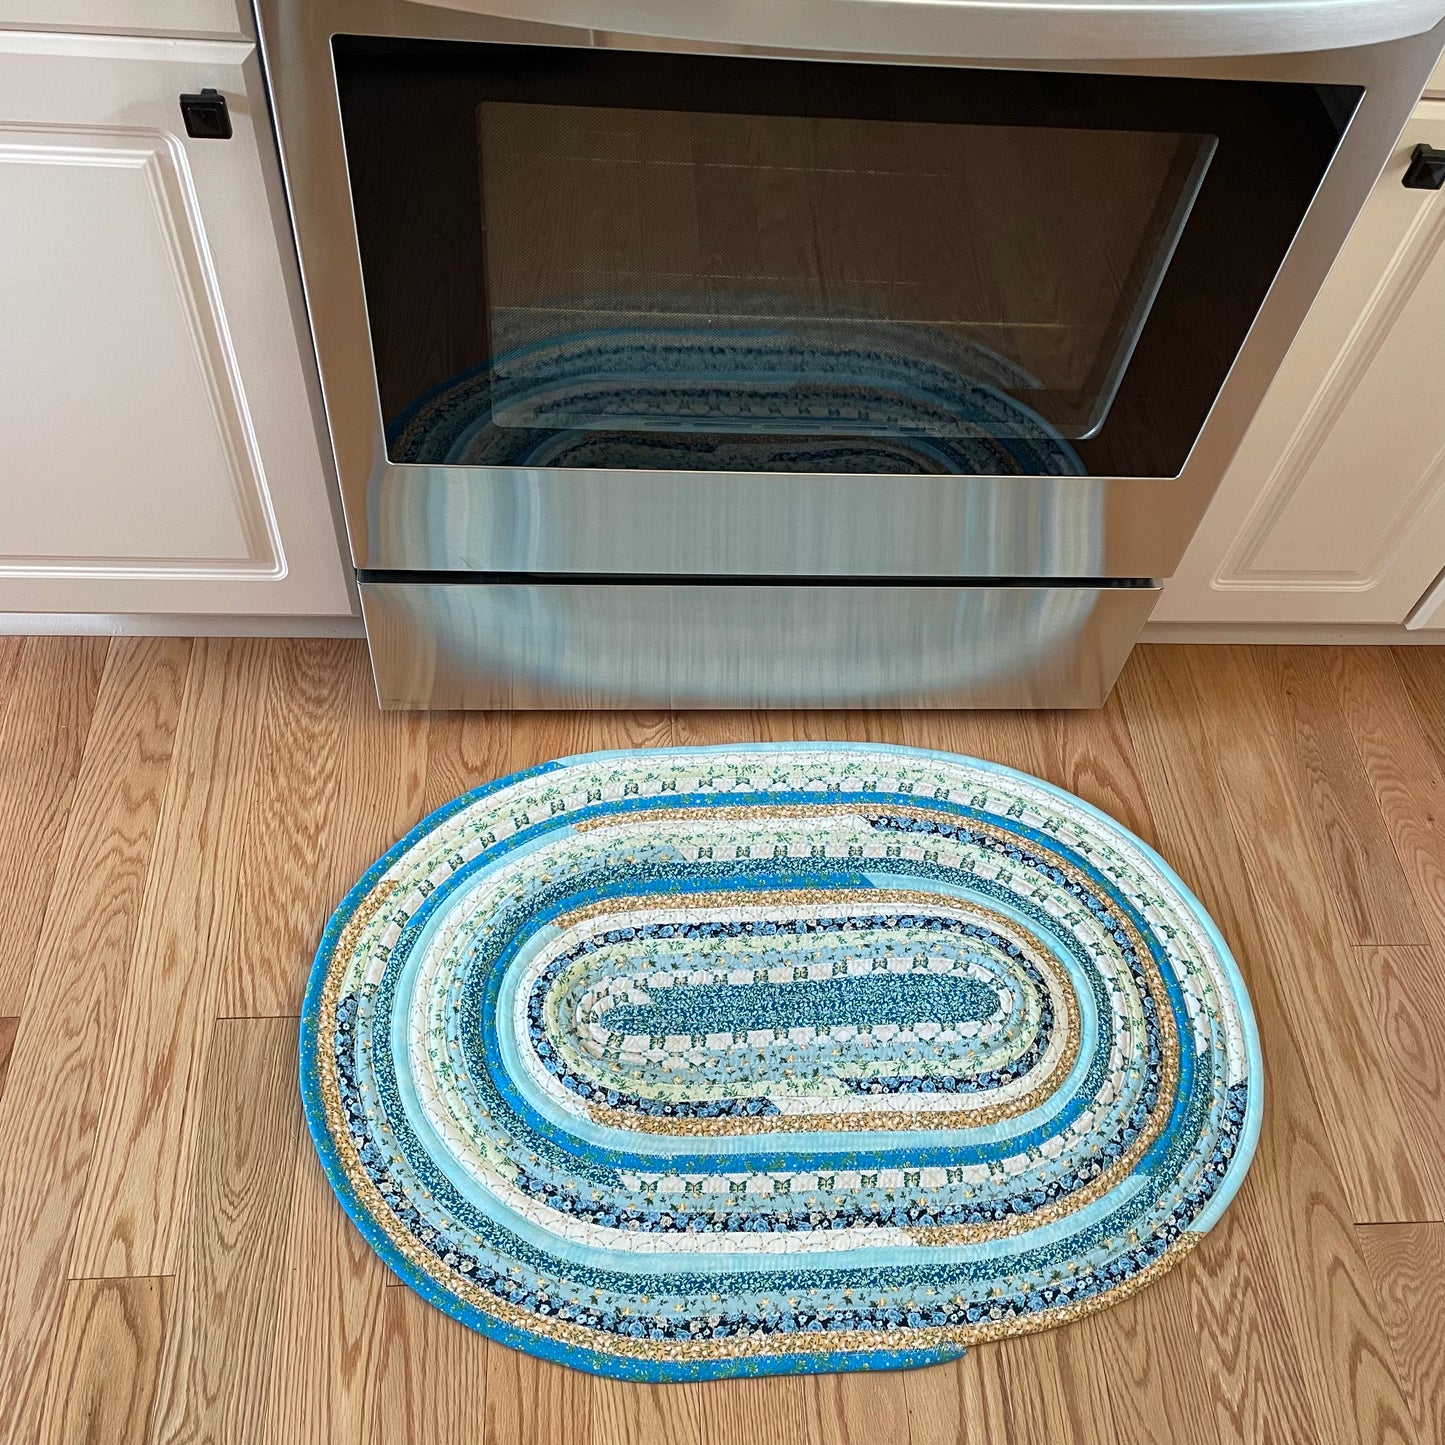 Farmhouse Kitchen Accent Rug Handmade Cotton Jelly Roll Rug For Kitchen, Bedside or Luxury Cotton Bathmat